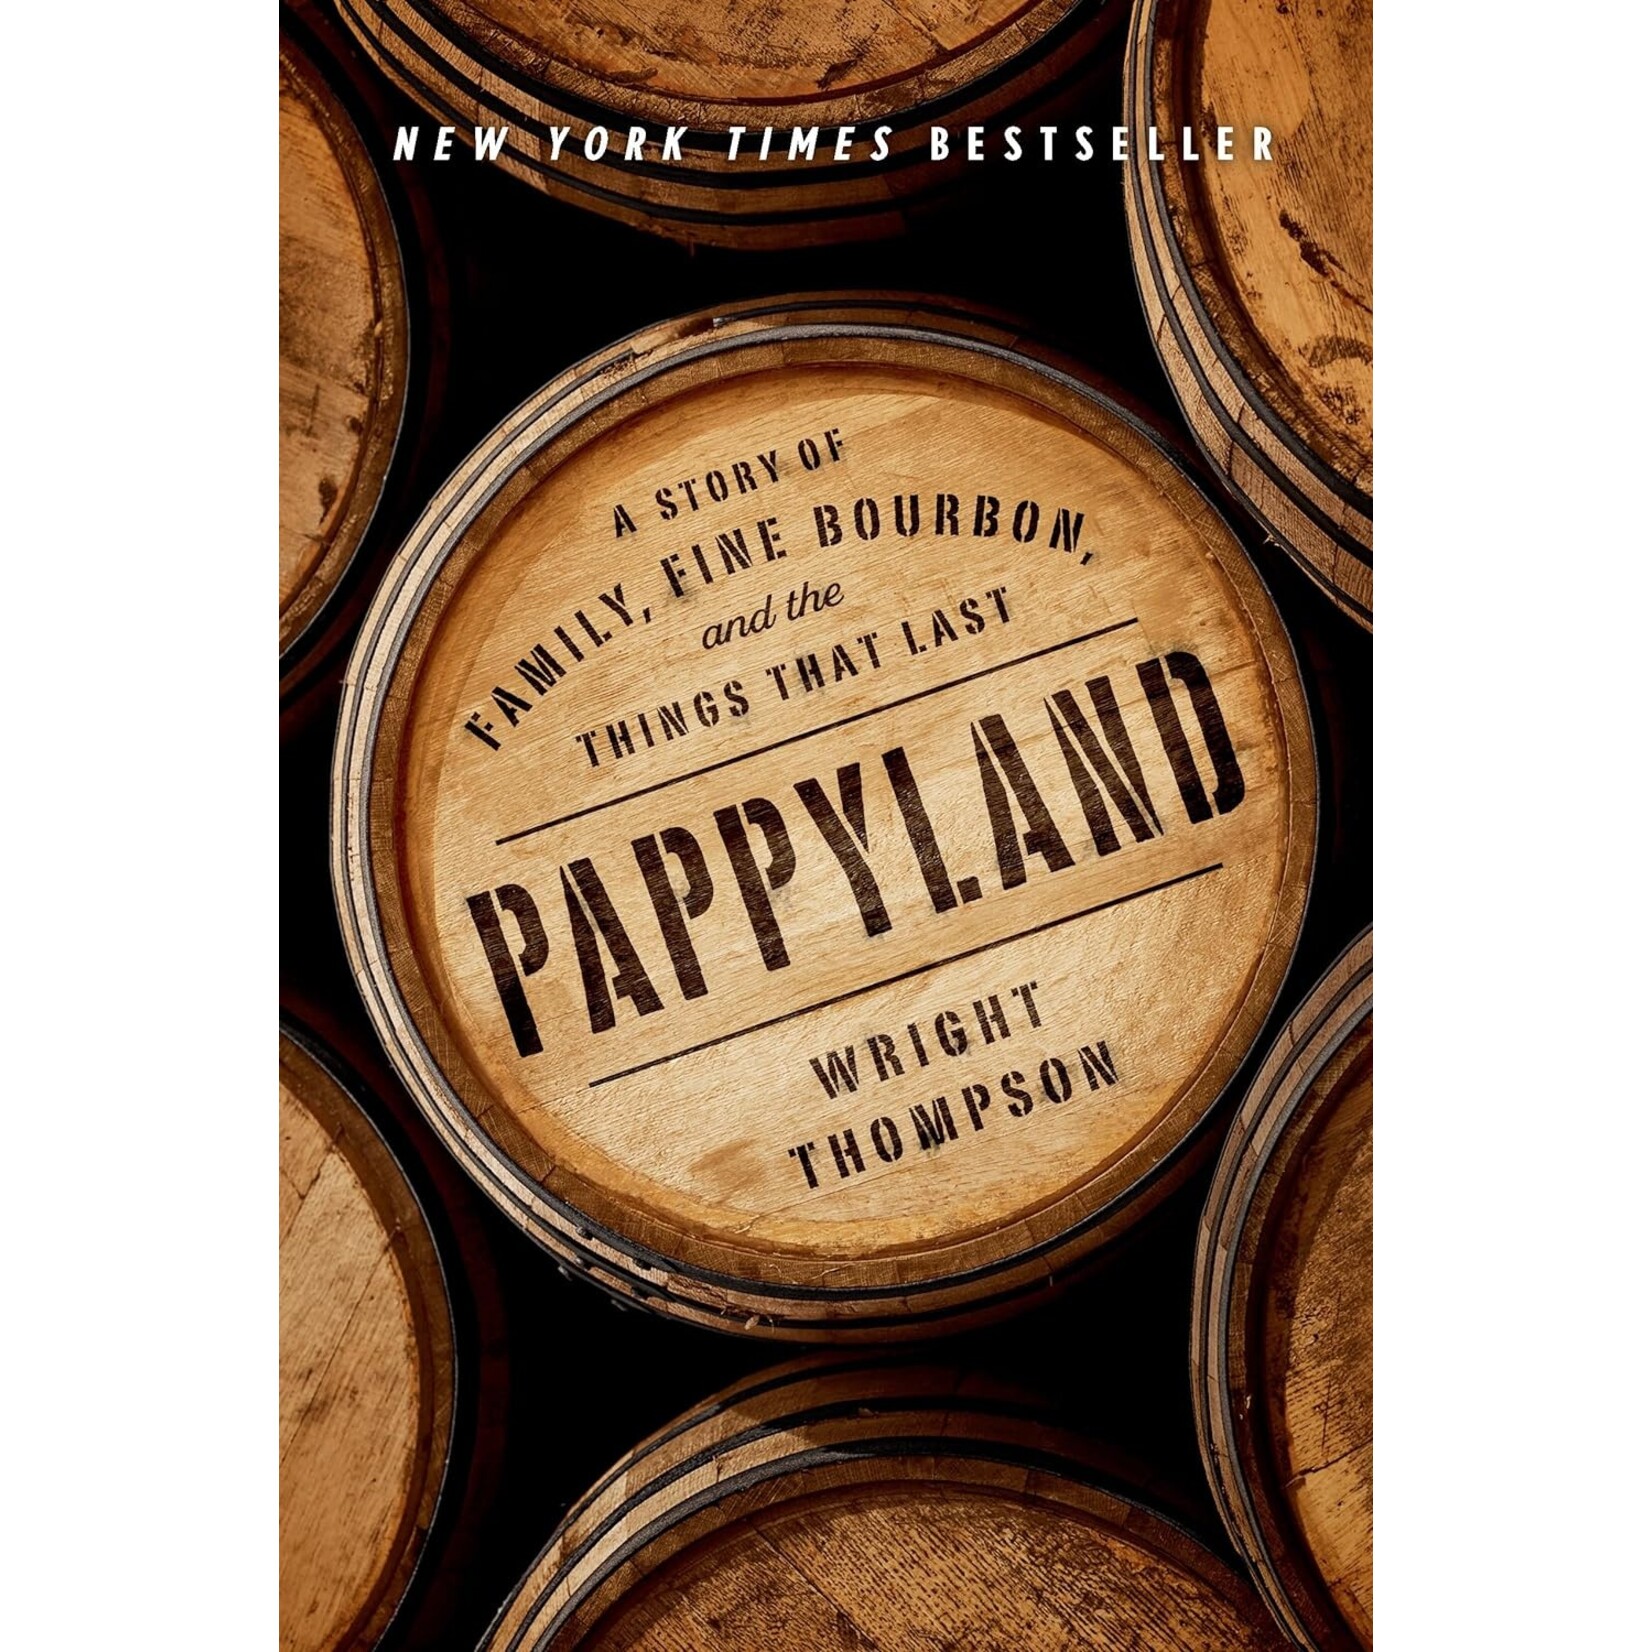 Editors' pick Pappyland: A Story of Family, Fine Bourbon, and the Things That Last Pappyland: A Story of Family, Fine Bourbon, and the Things That Last